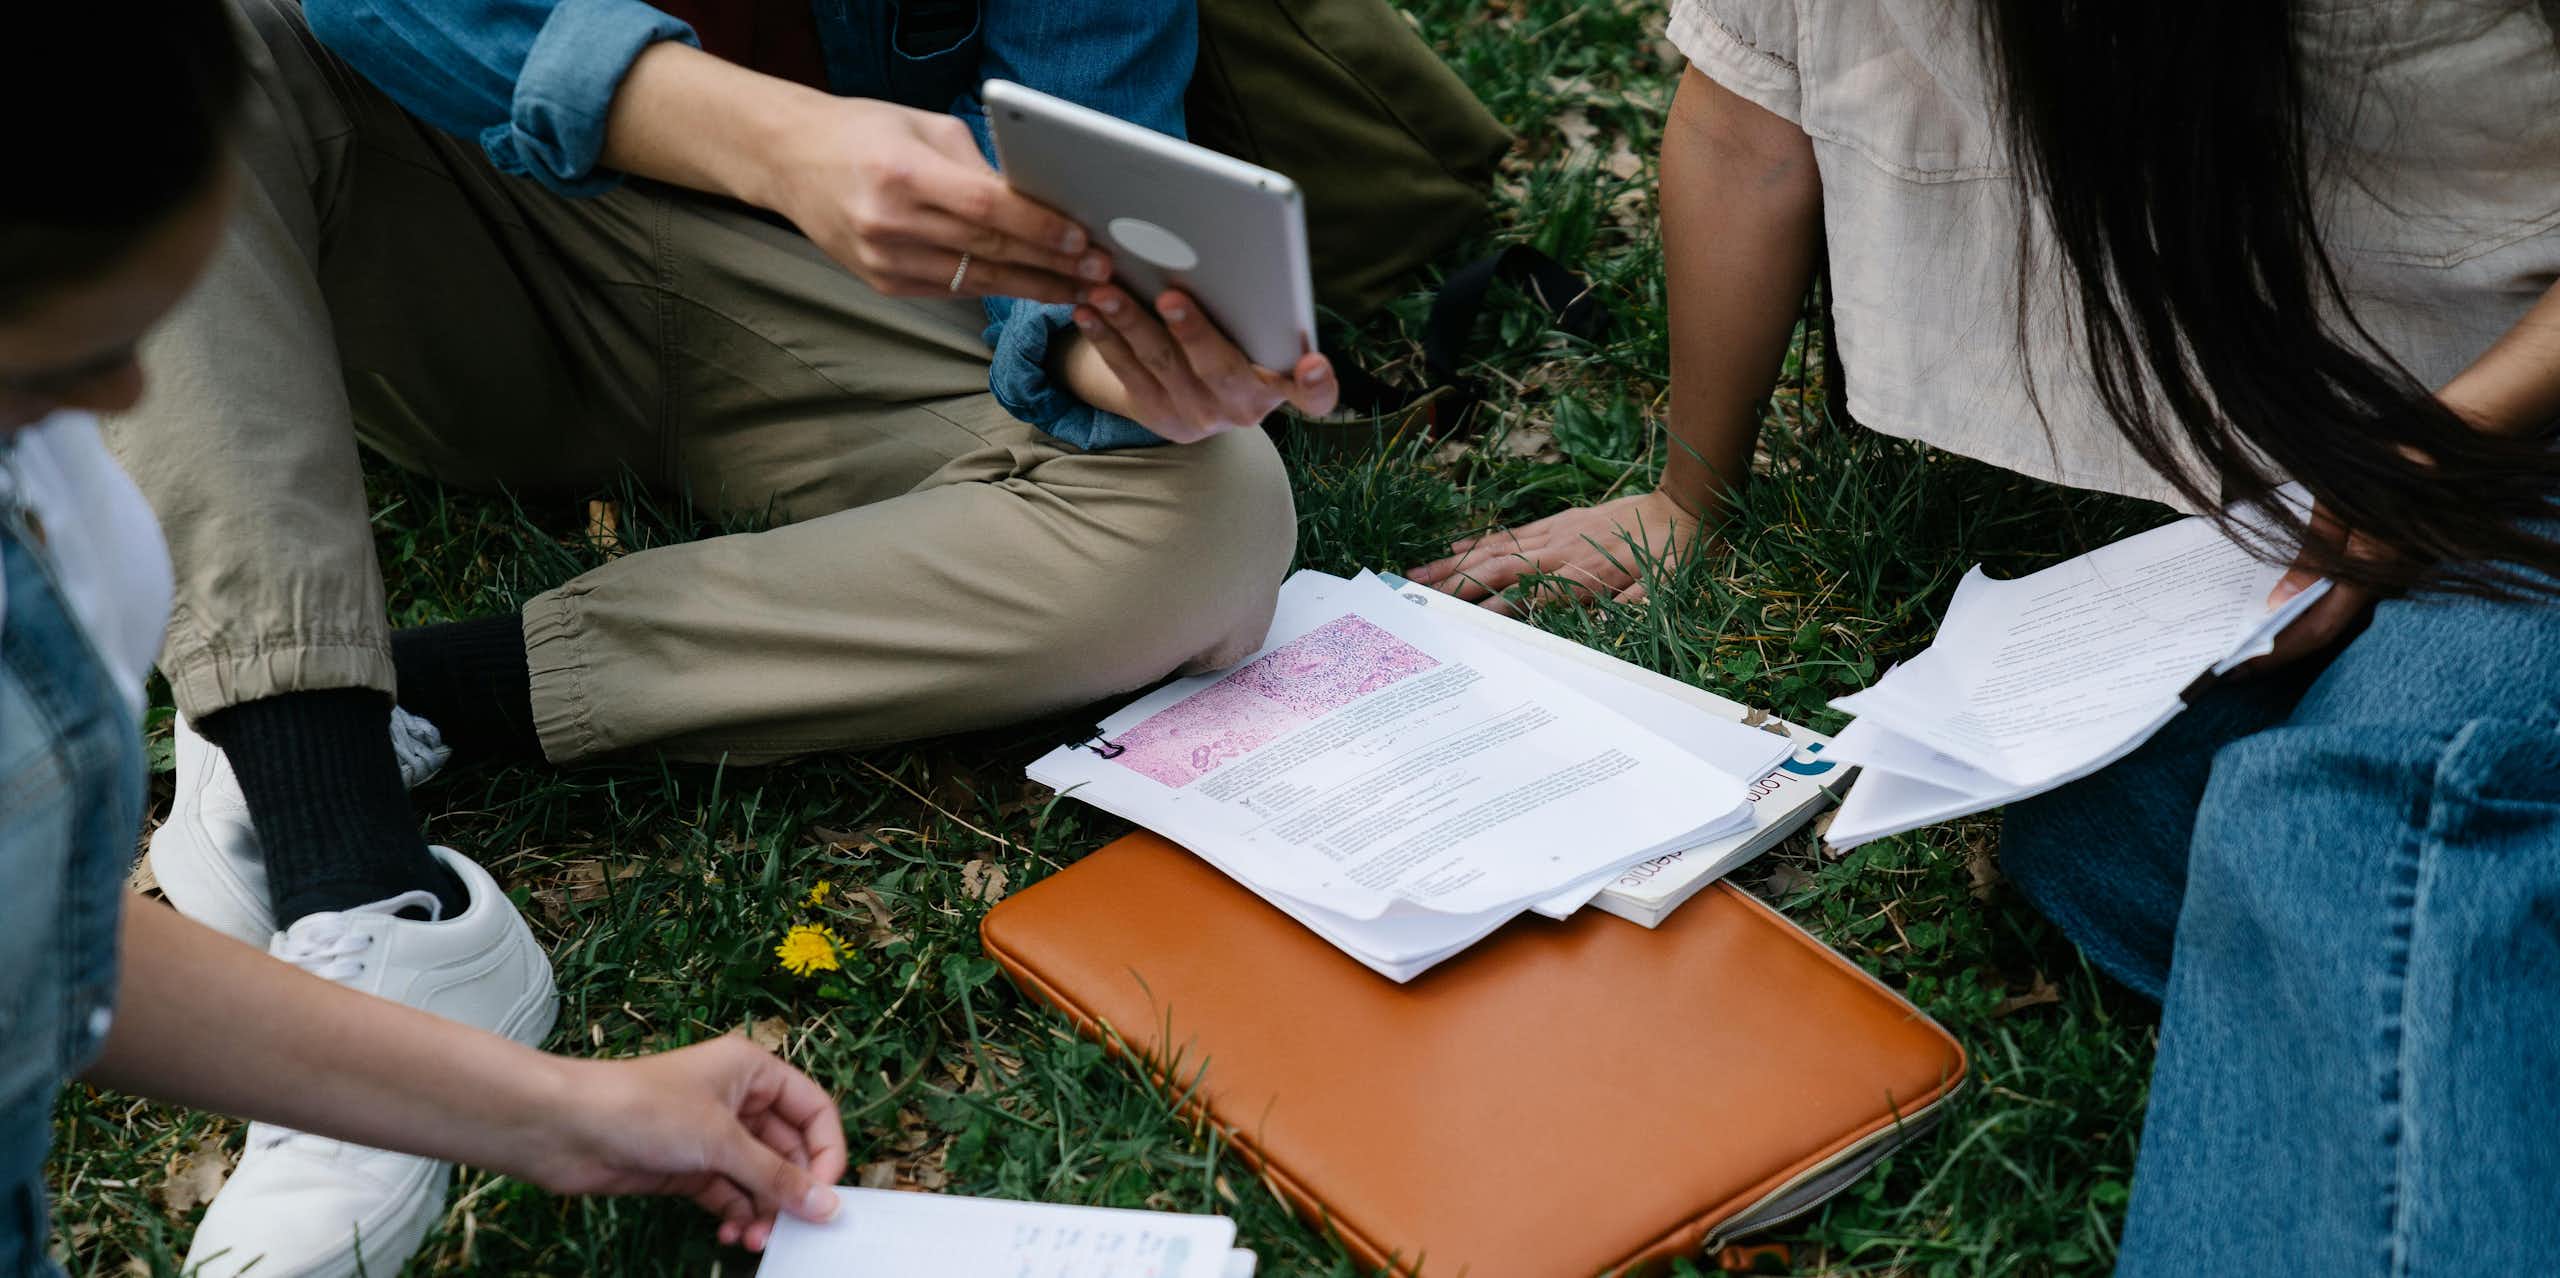 A group of young people sit on the grass with books and papers. 